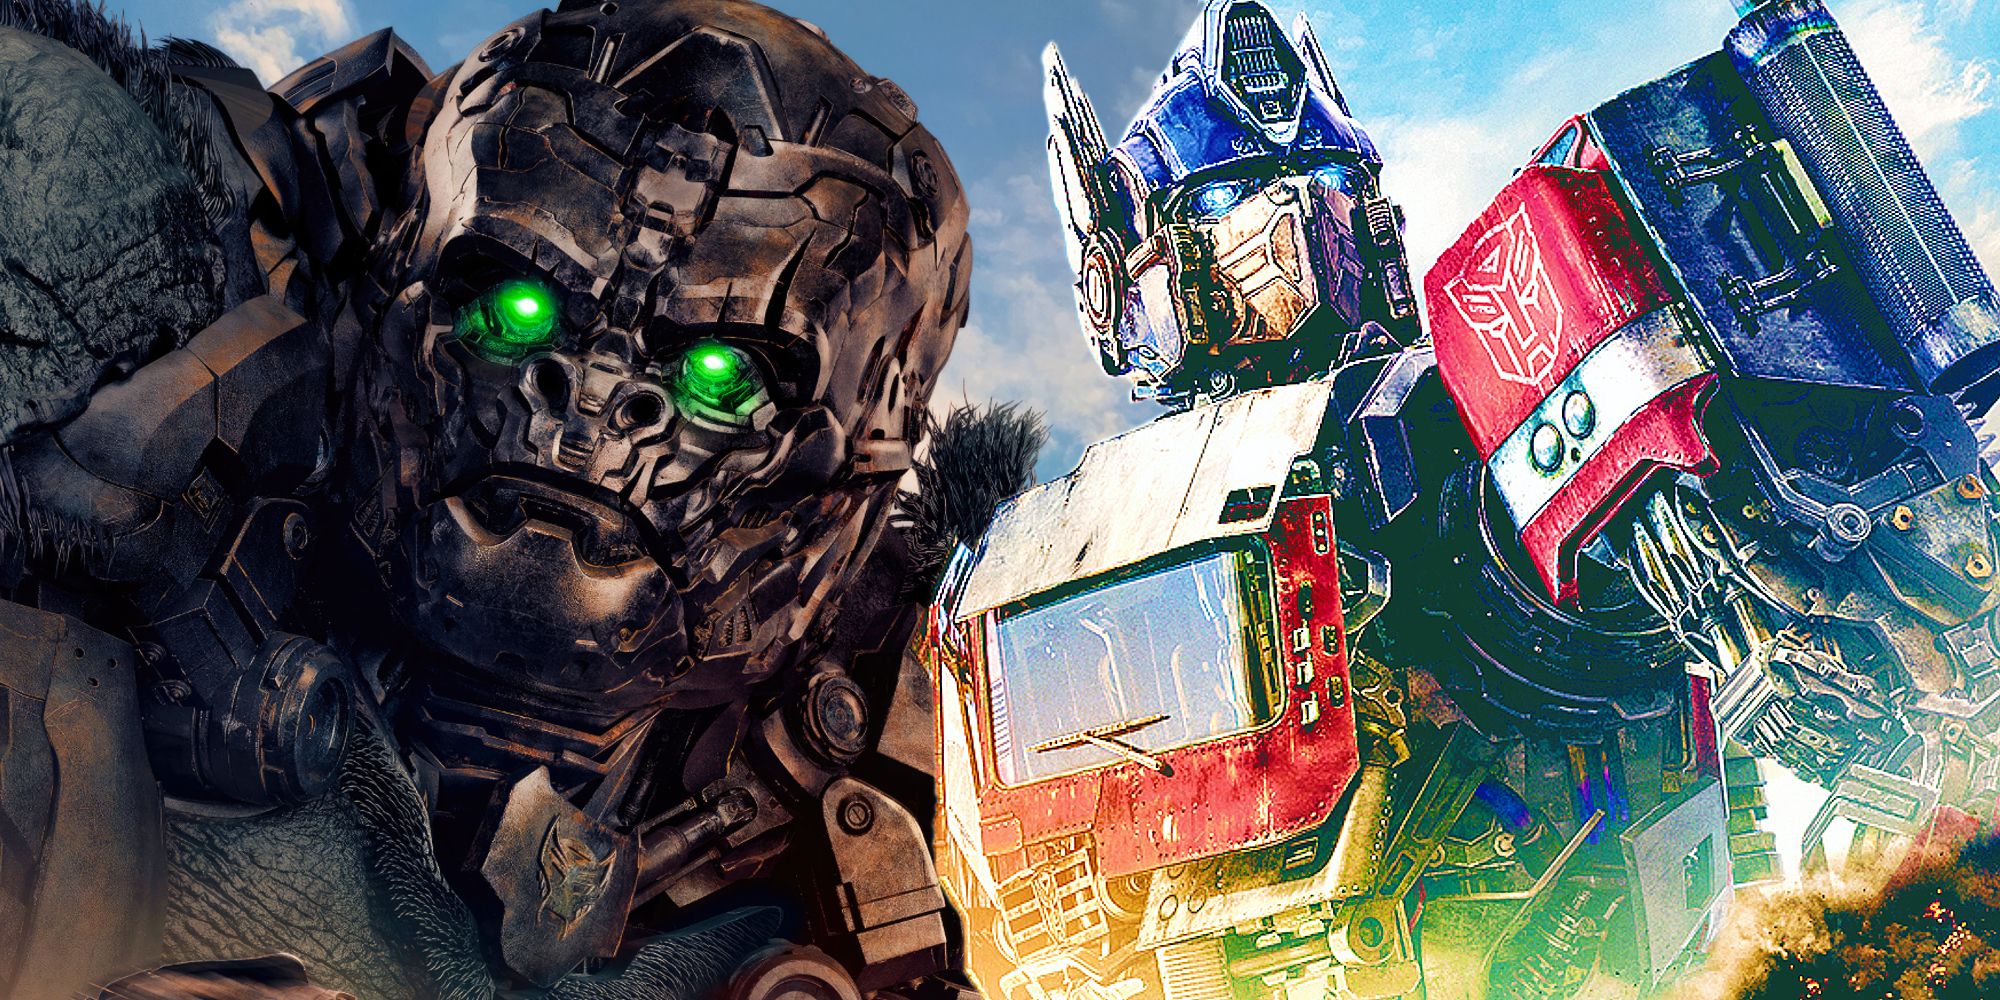 Optimus Prime and Optimus Primal's character poster from Transformers: Rise of the Beasts